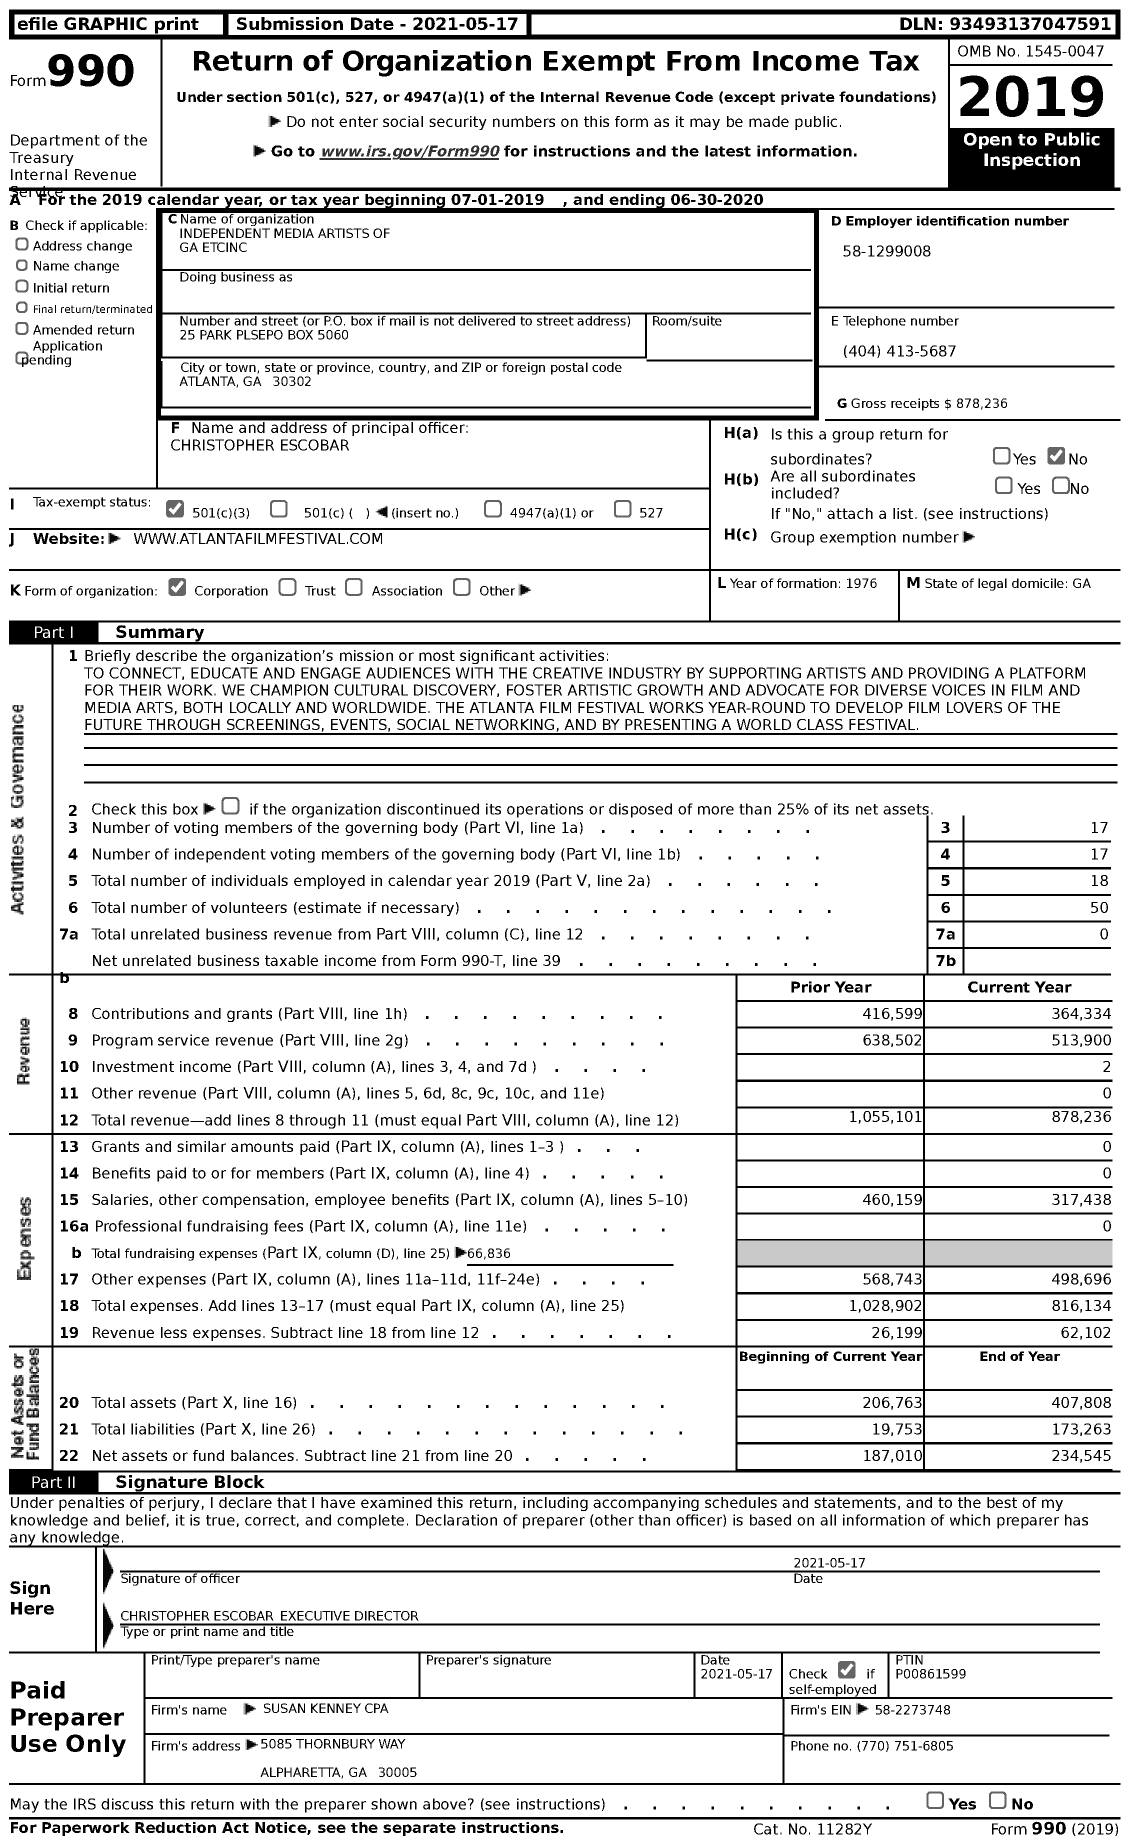 Image of first page of 2019 Form 990 for Independent Media Artists of Ga Etc (IMAGE)